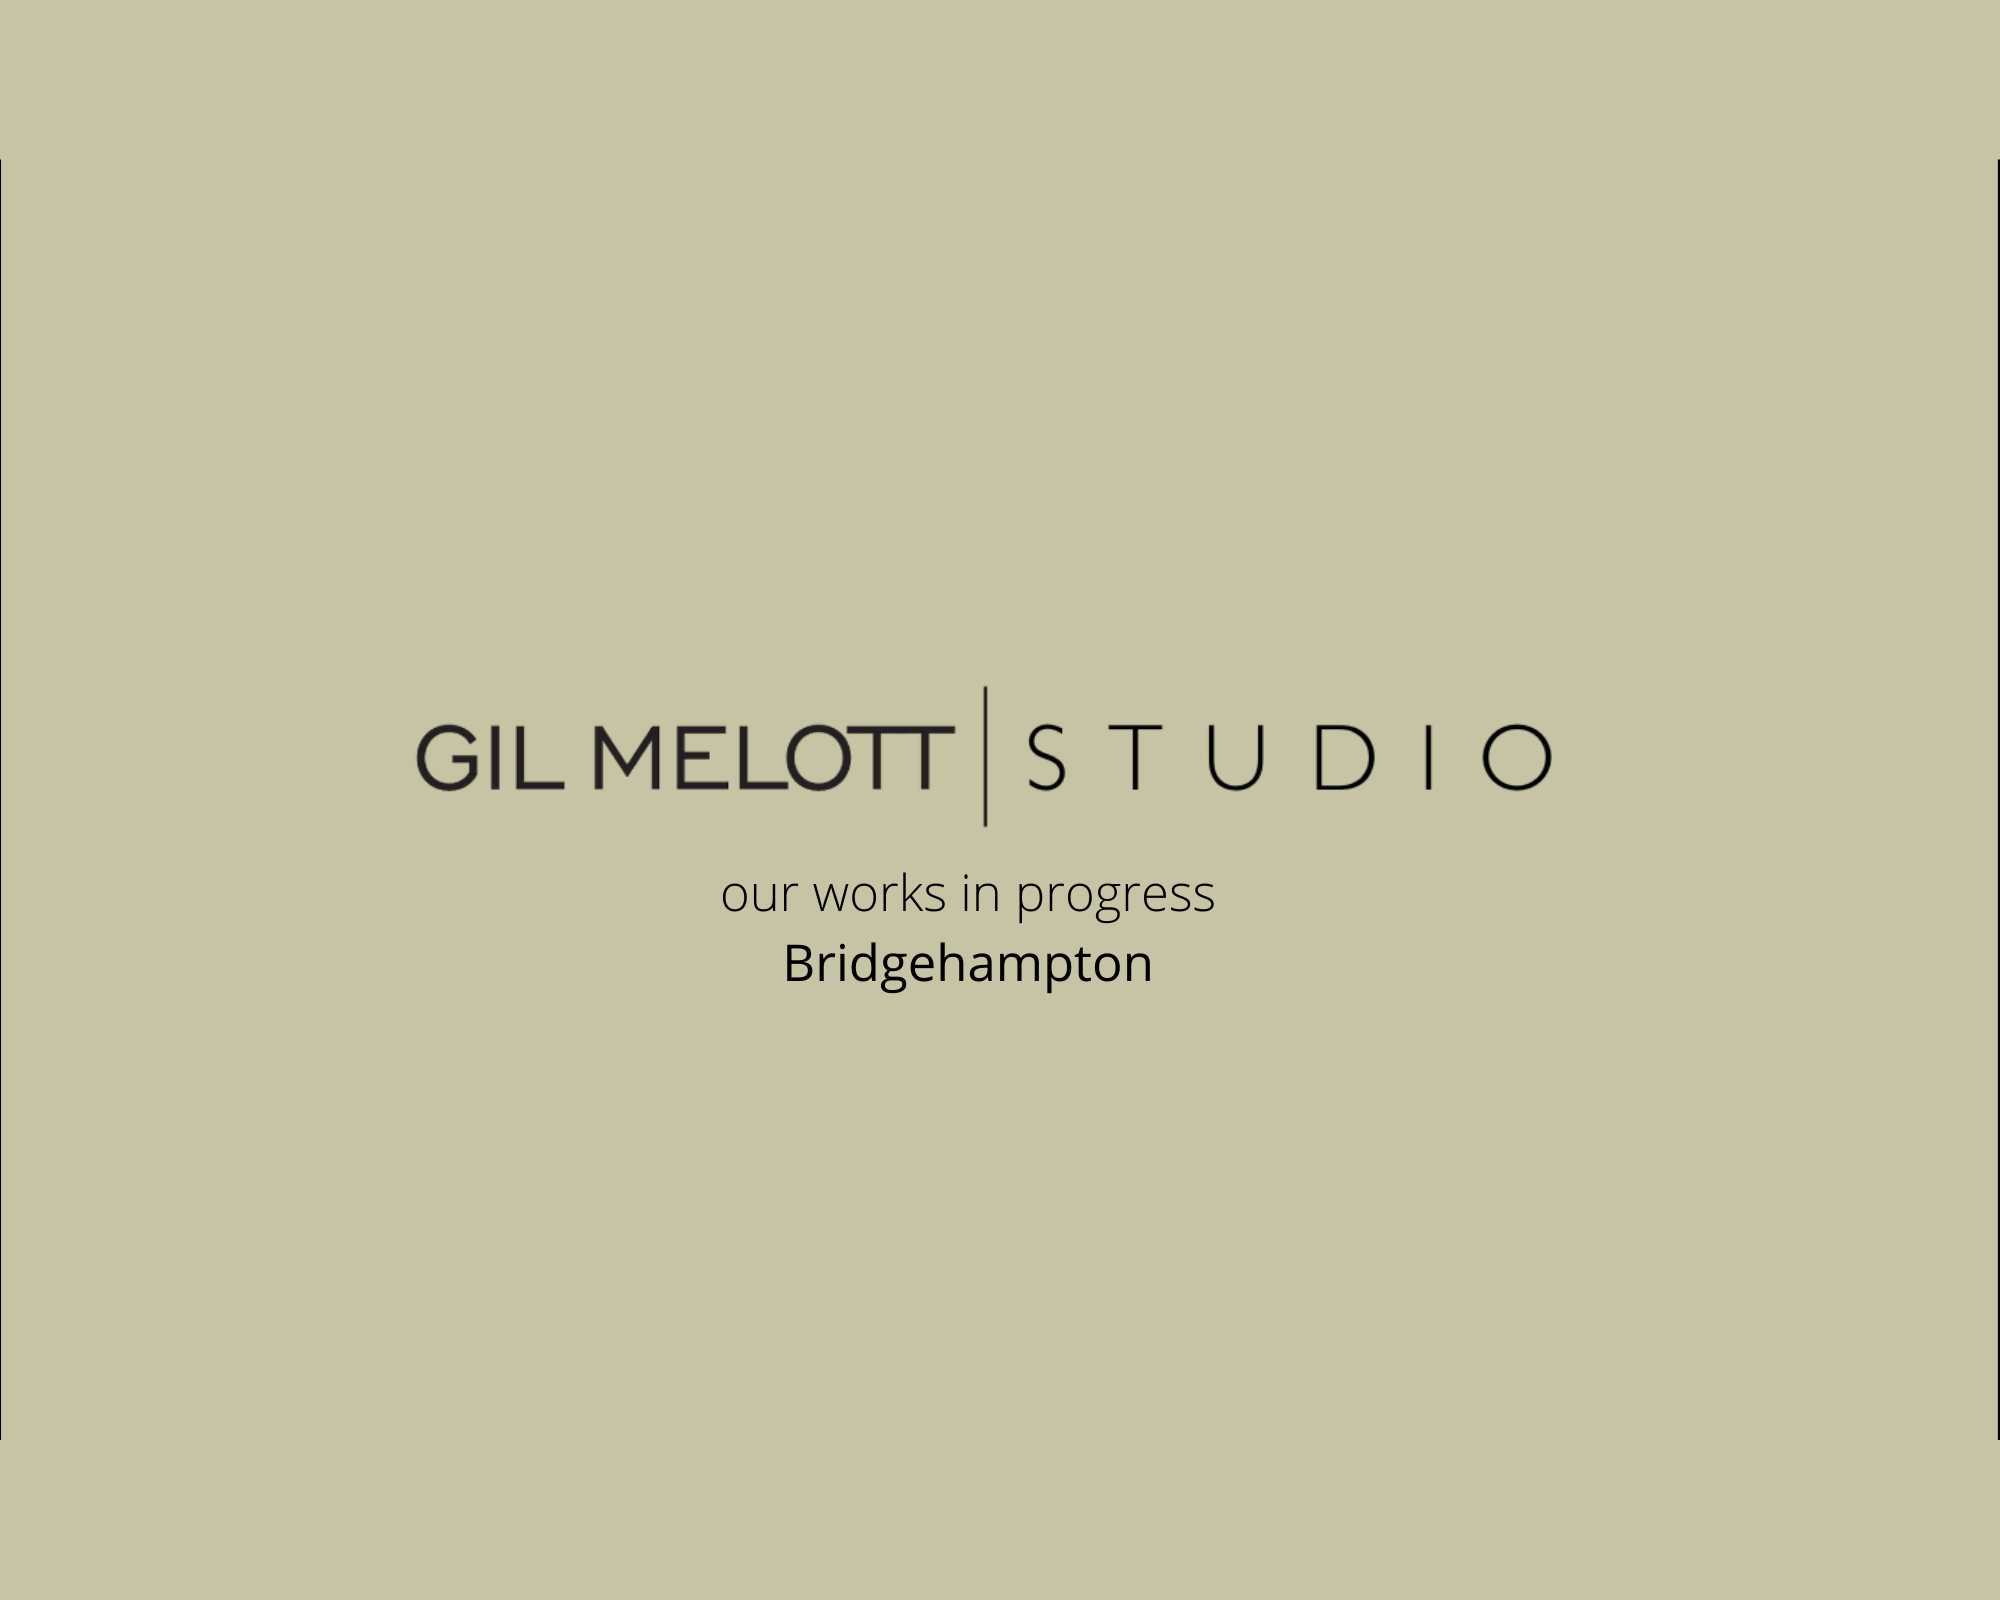 Gil Melott Studio is a luxury creative company focusing on high end residential and boutique hospitality interiors. Gil Melott Studio has been recognized for an unapologetic approach to integrating eras and styles in-15.png